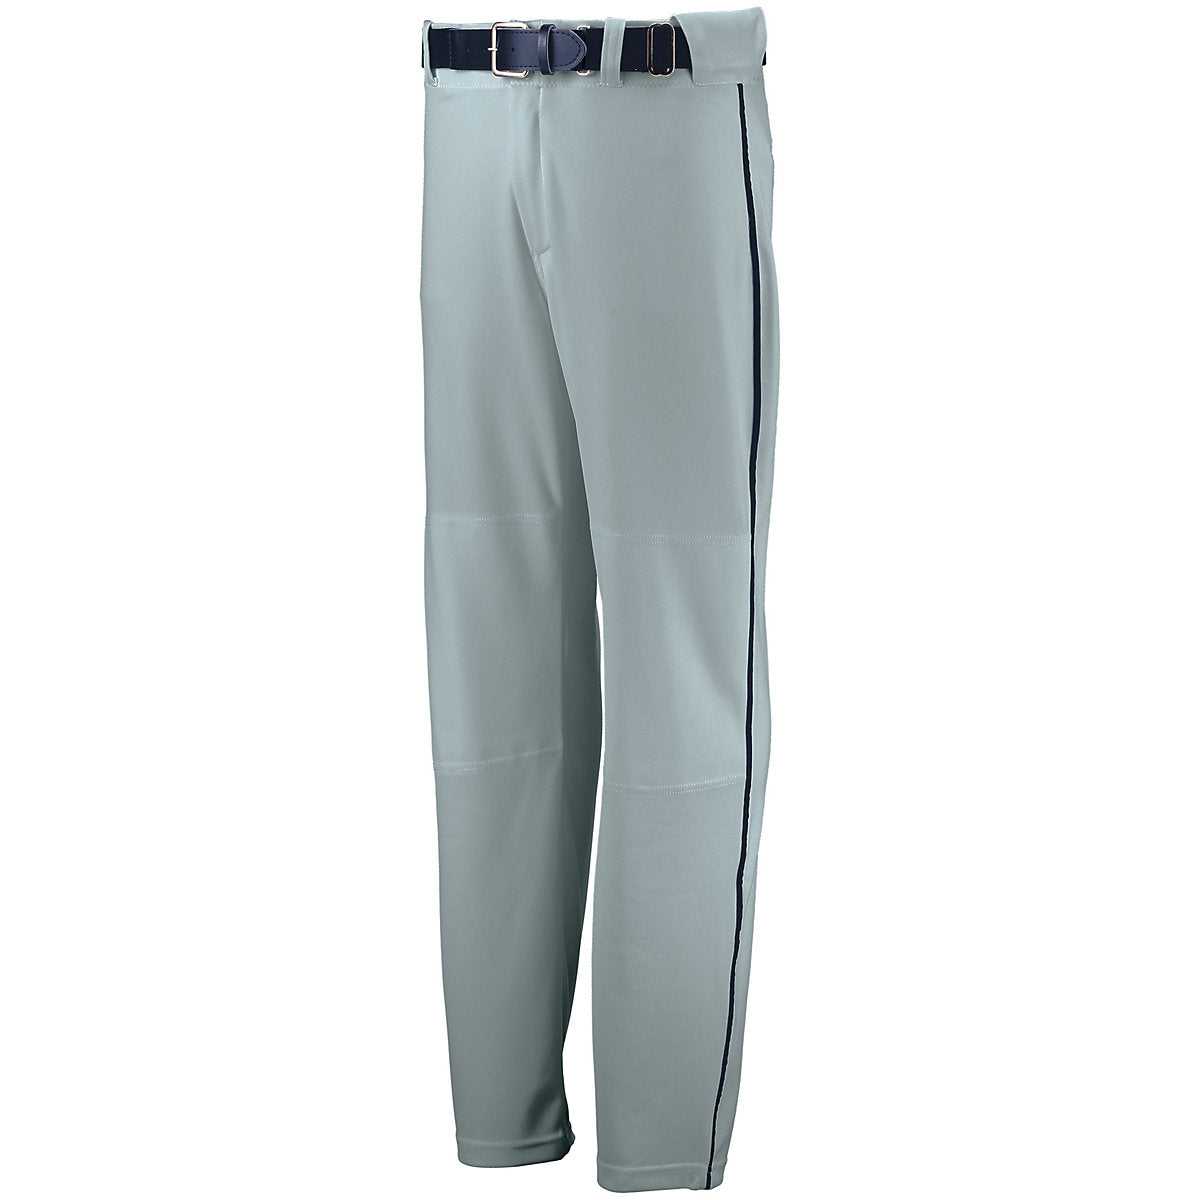 Russell 233L2B Youth Open Bottom Piped Pant - Baseball Grey Navy - HIT a Double